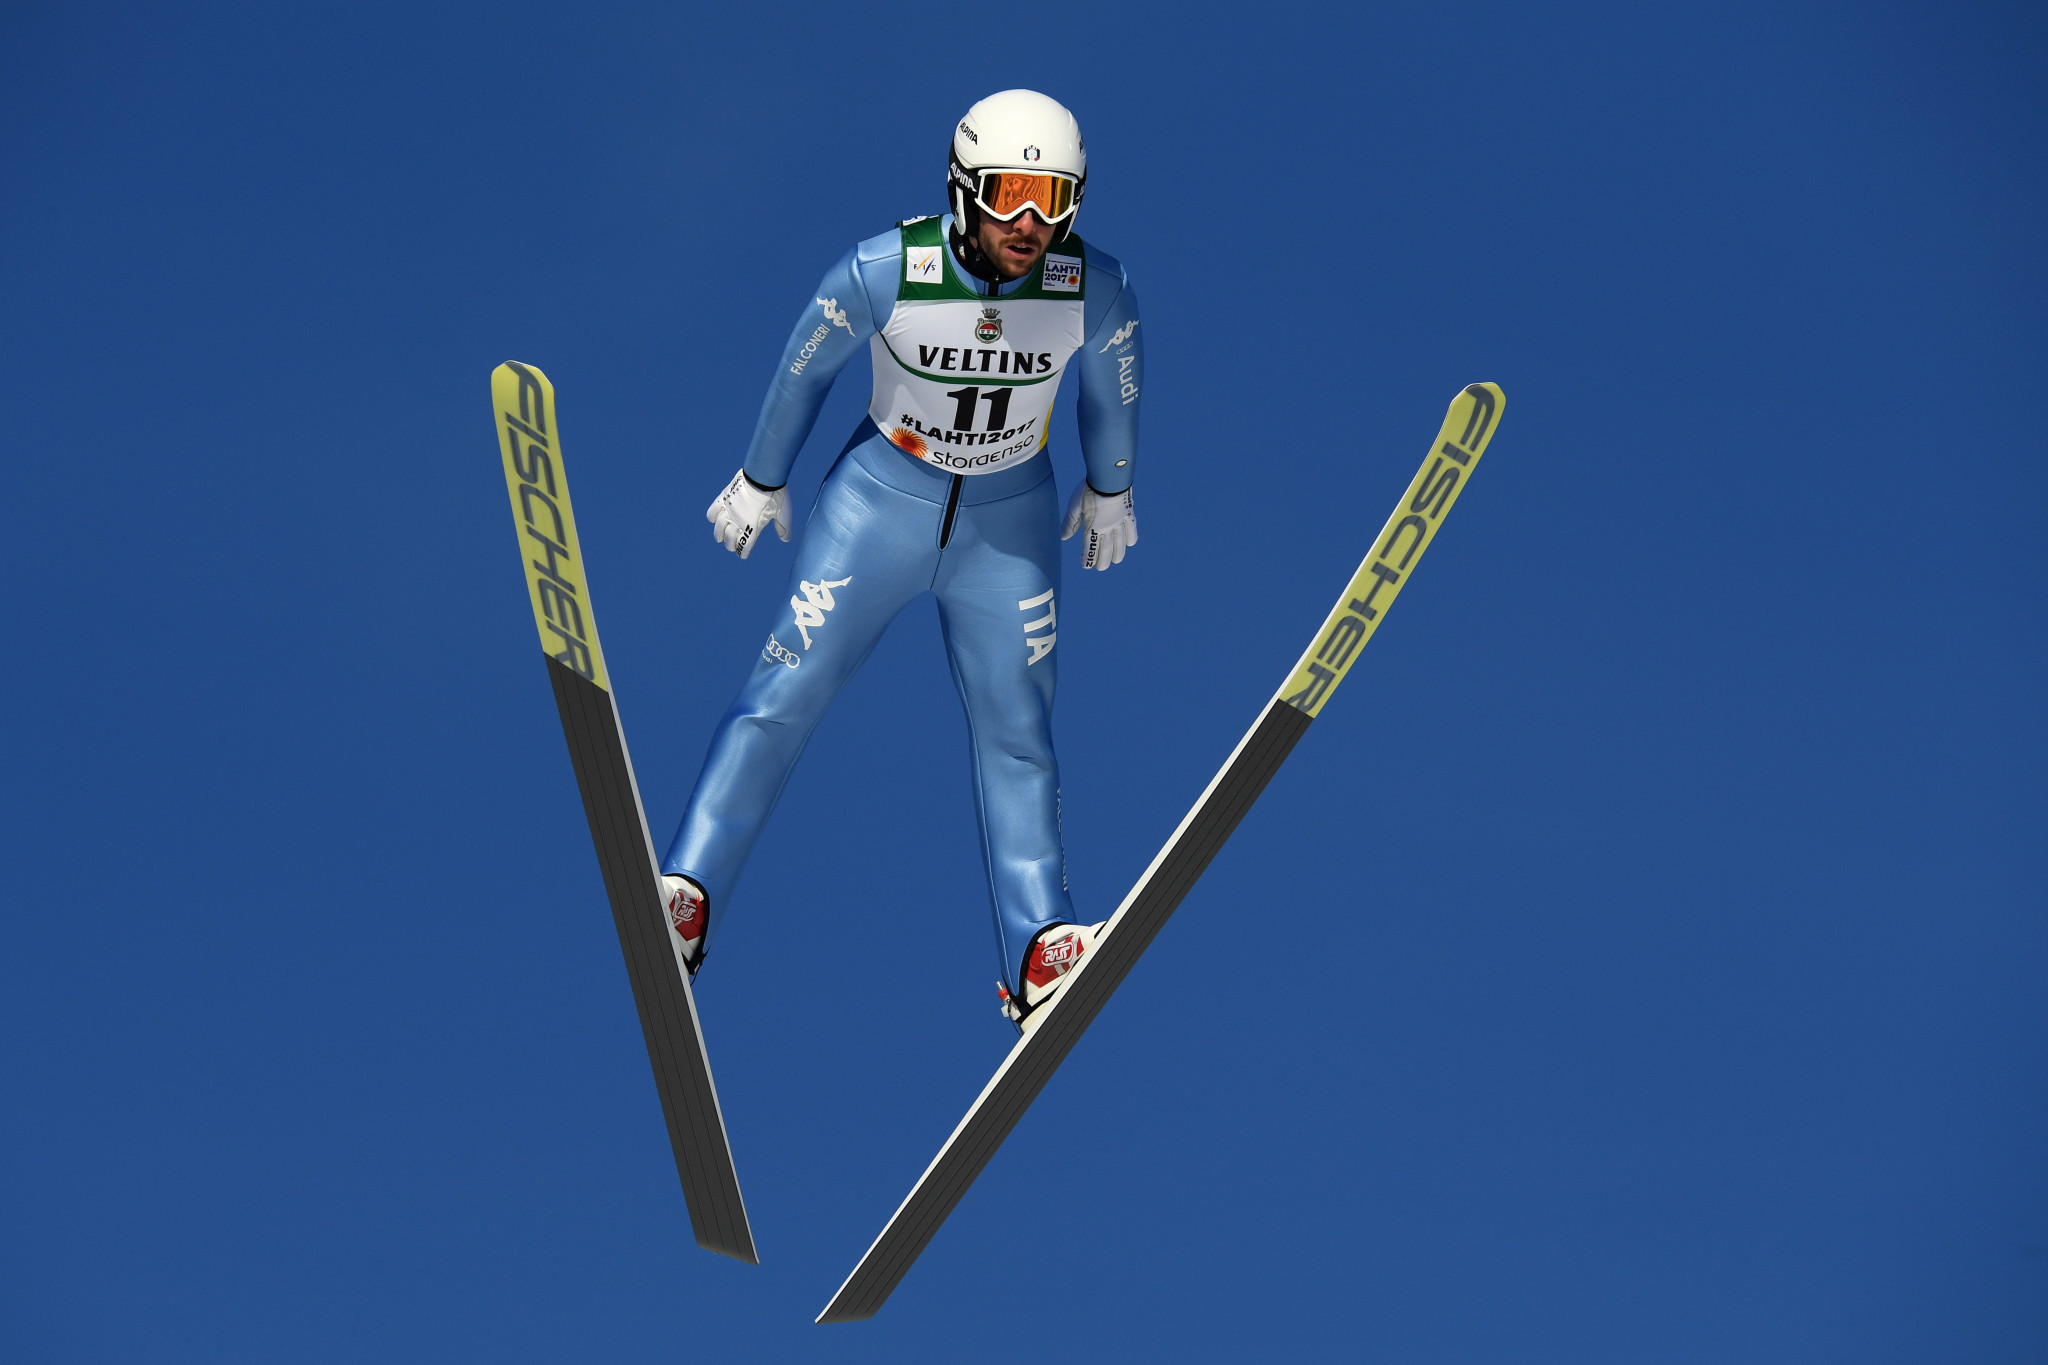 Bauer announces retirement from Nordic combined